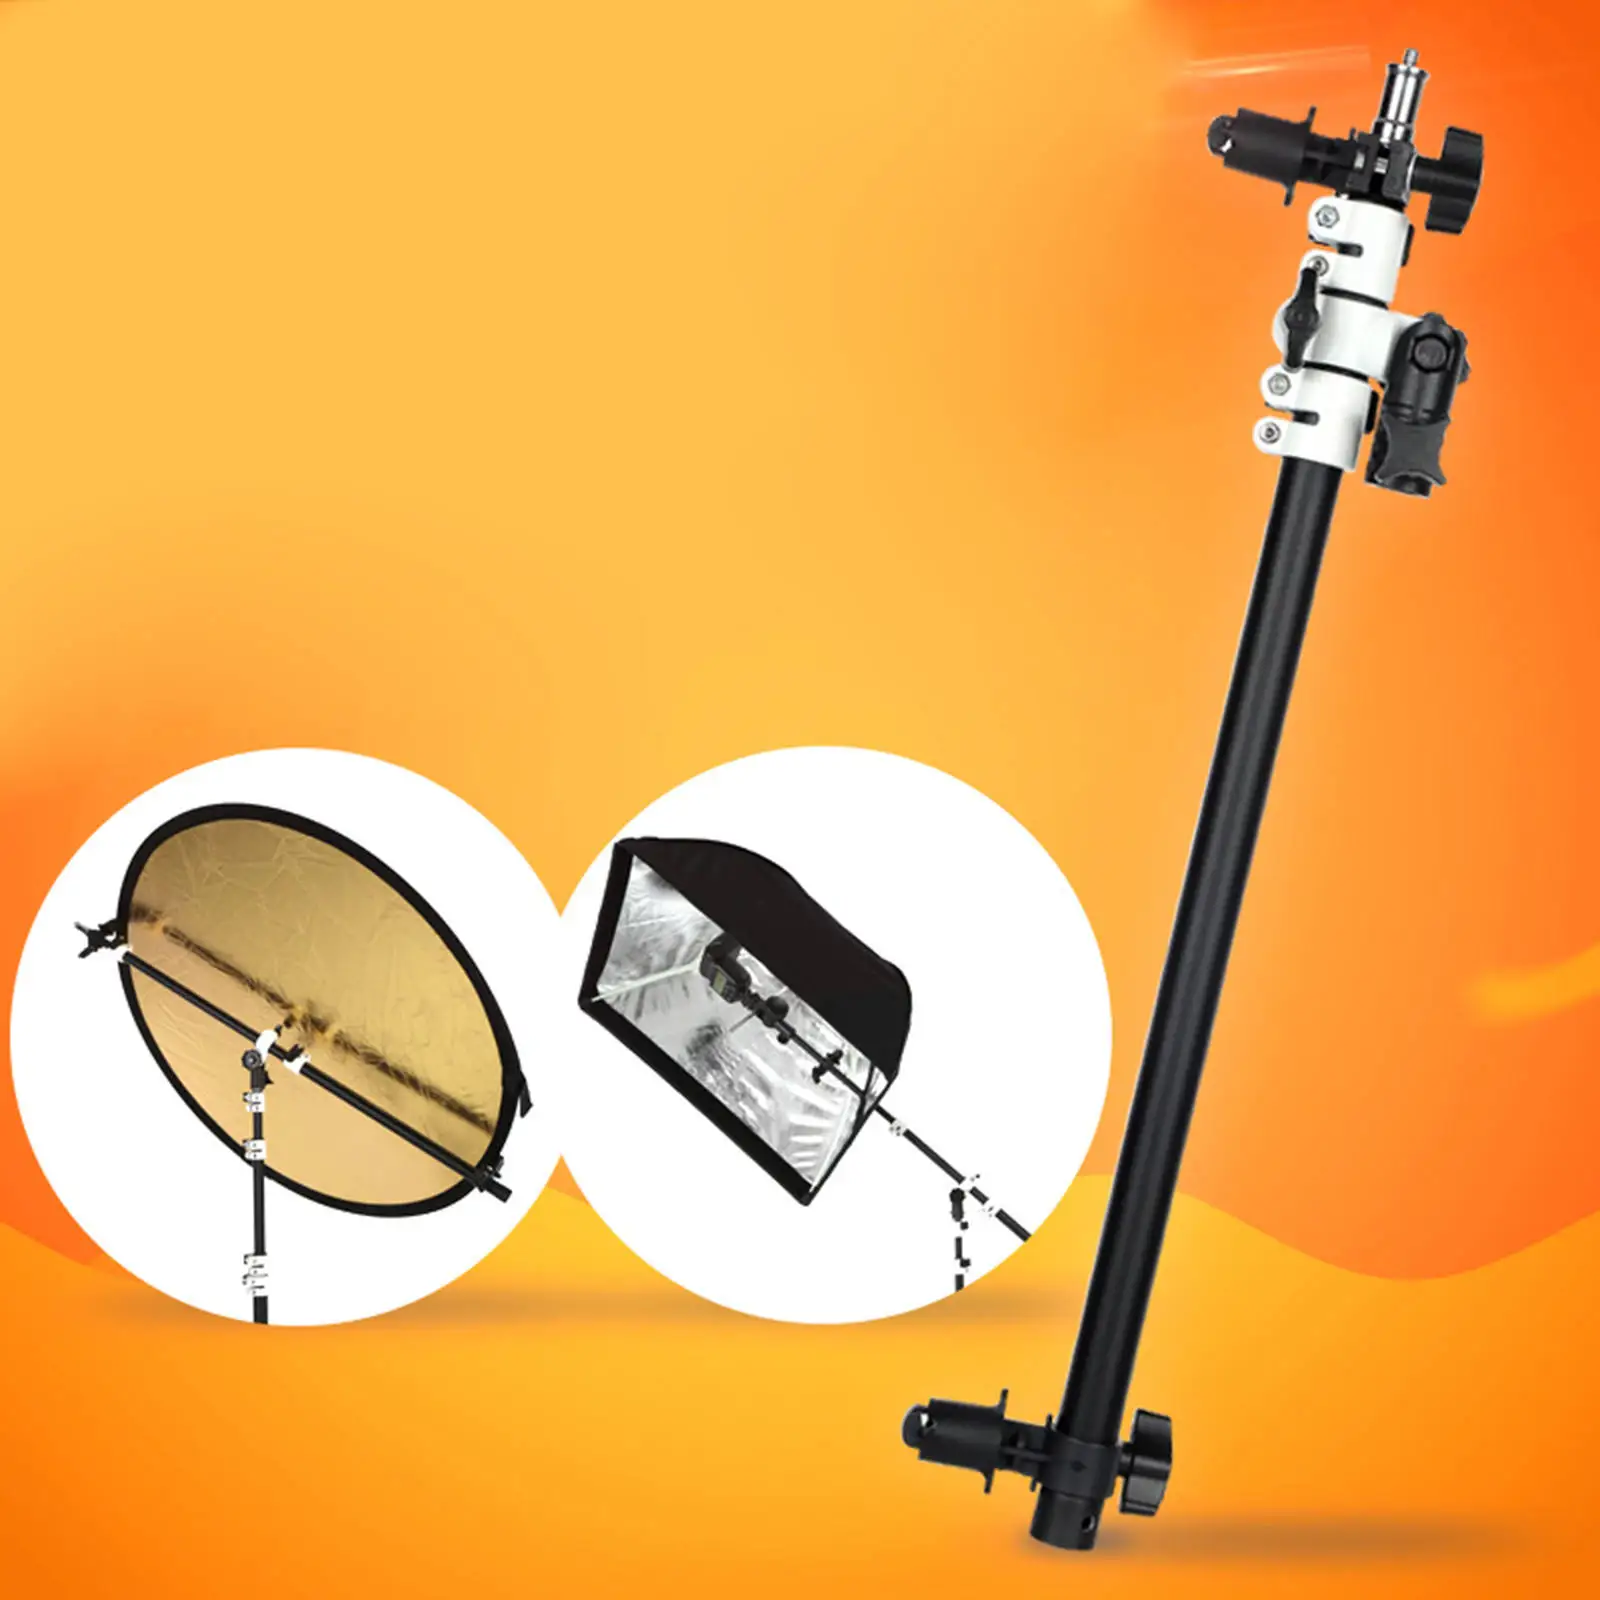 Portable Reflector bracket vertical clip For photography Panel Reflector diffuser Bracket Swivel Head Reflector Arm Support